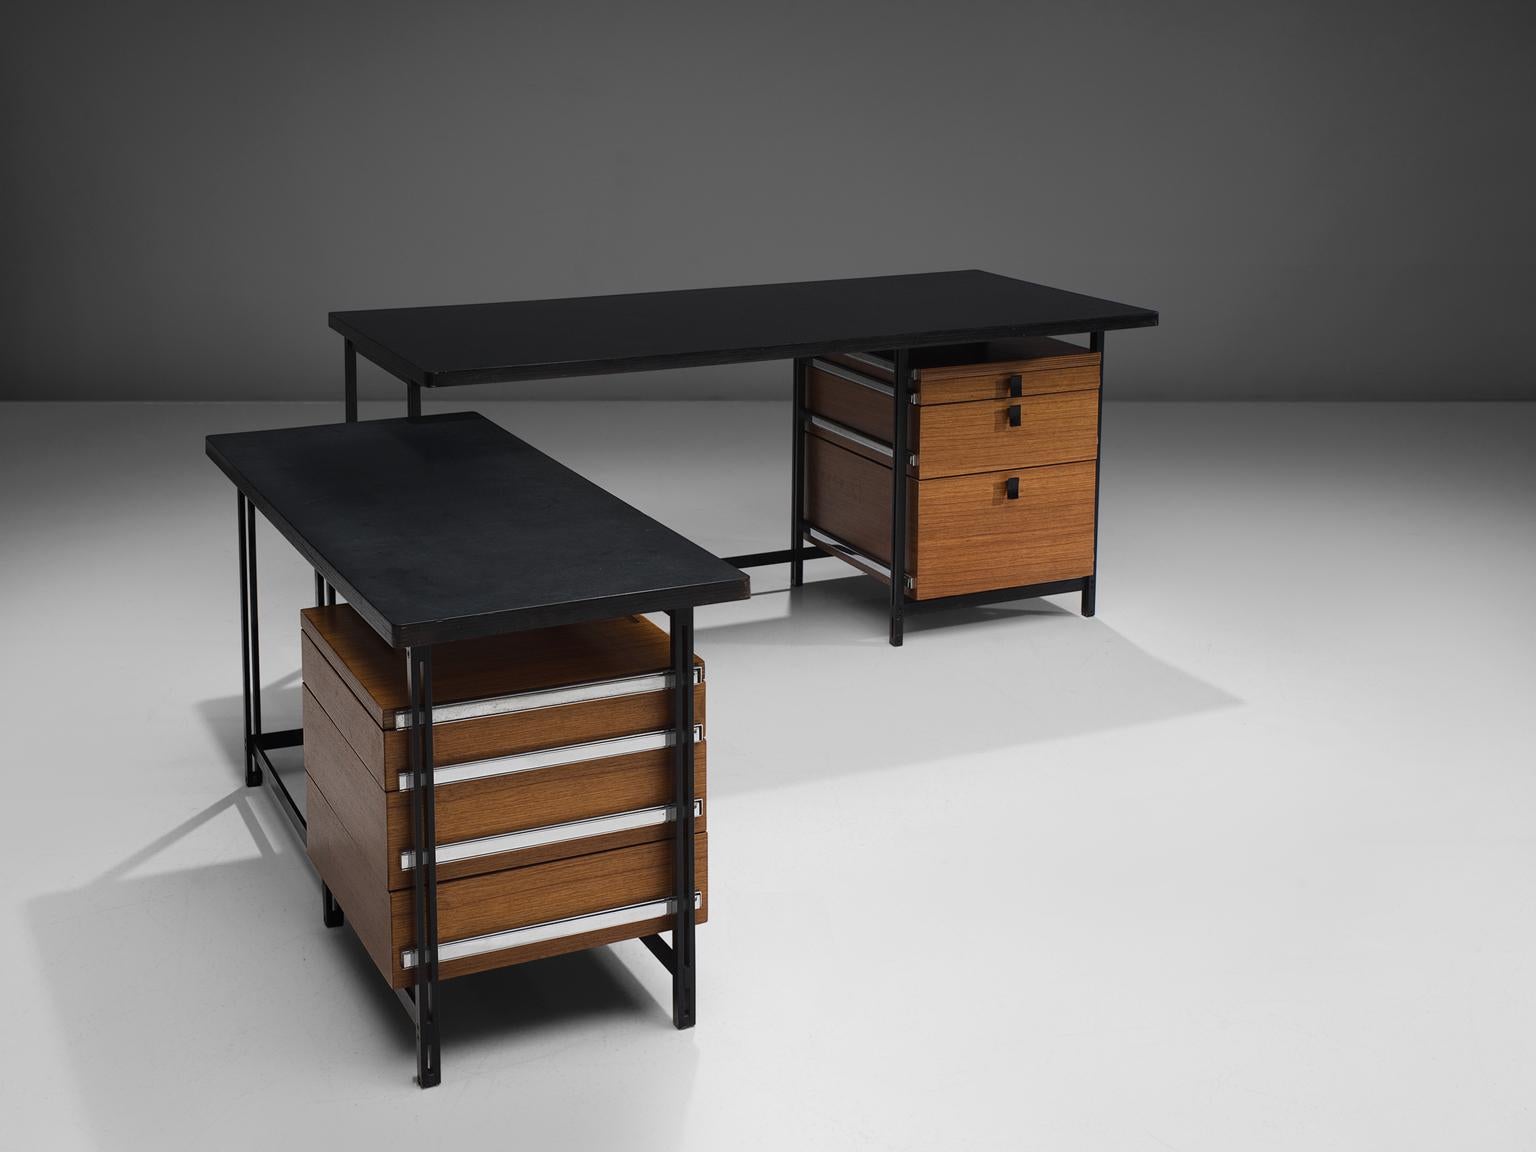 Jules Wabbes, two-part corner writing desk, teak, black metal, chrome, Belgium, 1960s

This free-standing corner desk is designed by Jules Wabbes in the 1960s. It consists out of two tables, each with a chest of drawers, in different heights. Due to